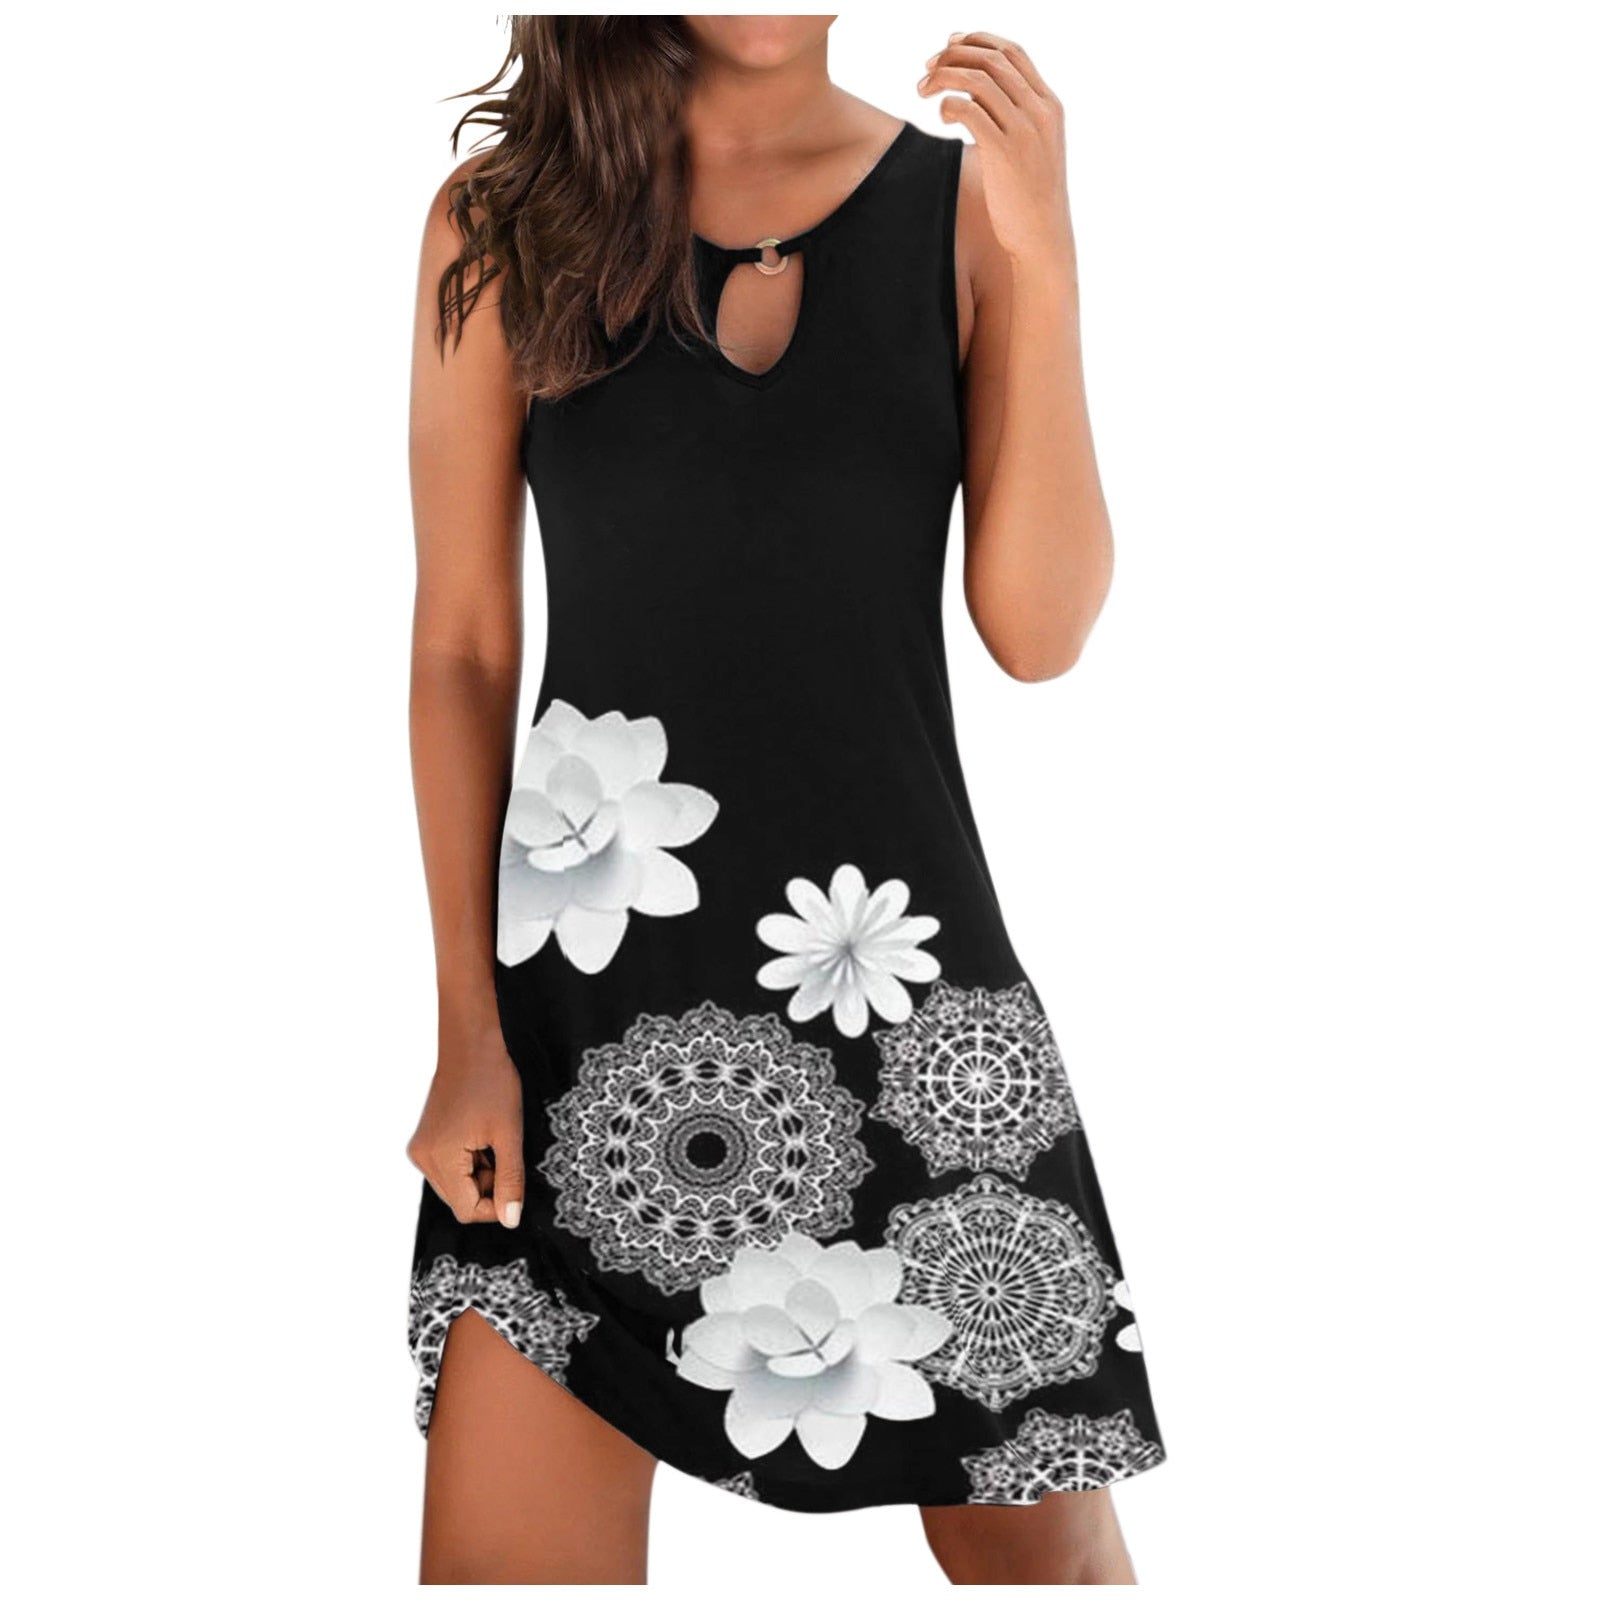 Casual Sleeveless Women's Vintage Summer Dress with Floral Print Loose Knee-length Beach Pullover